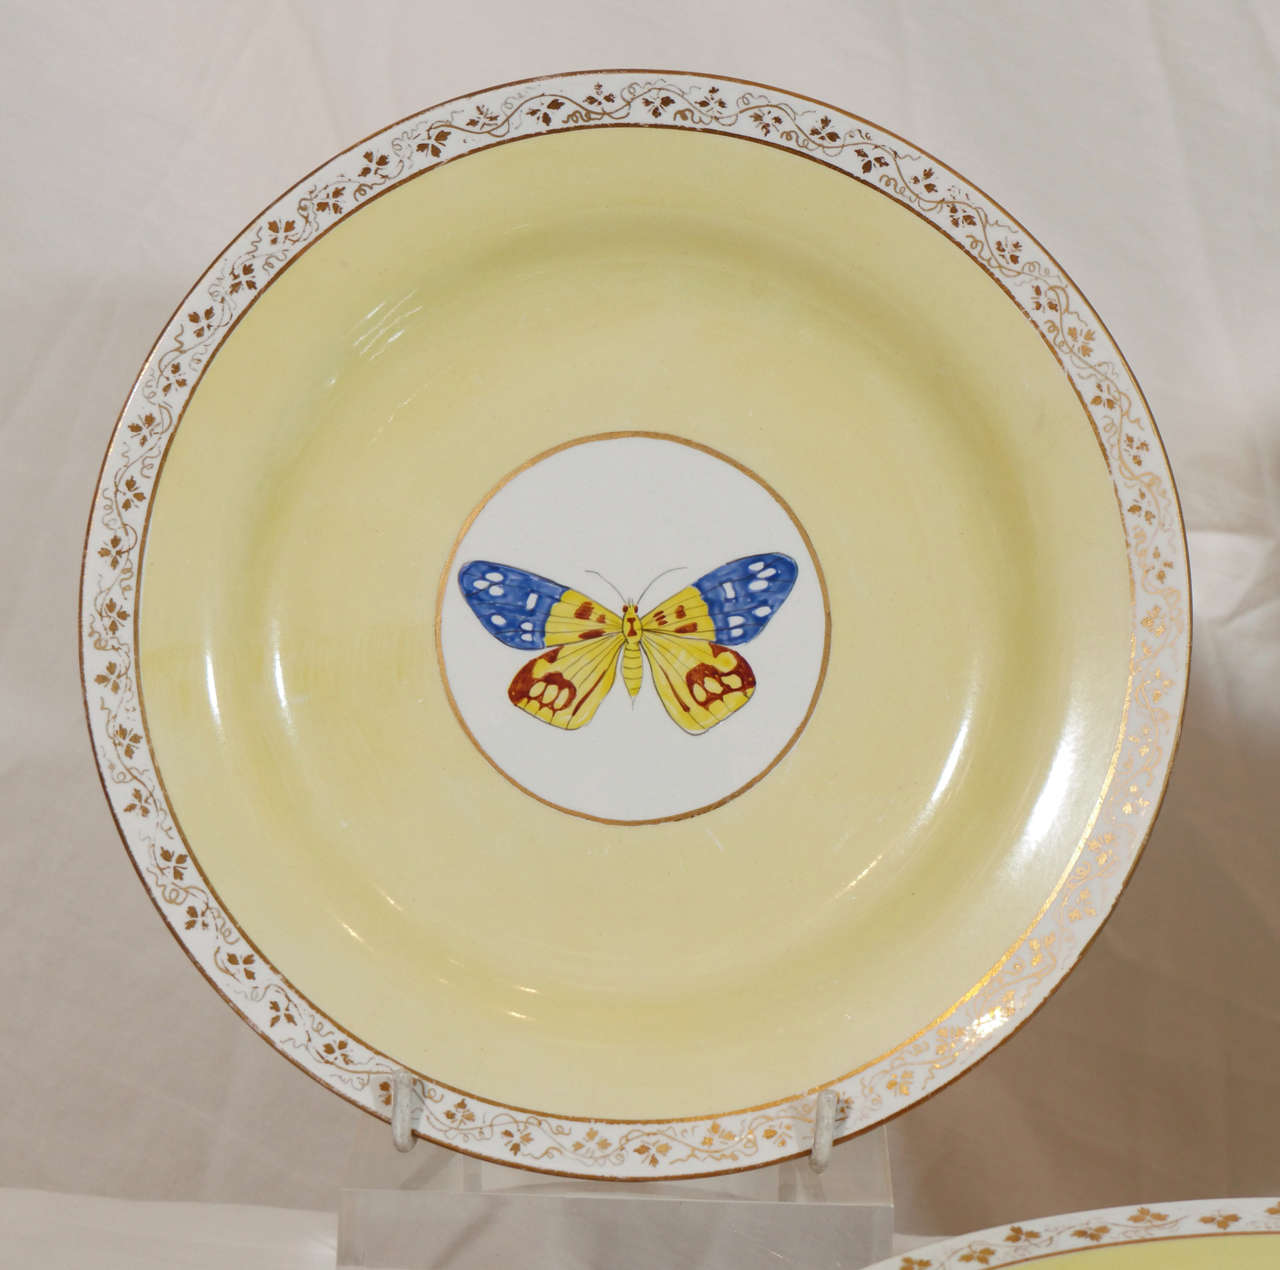 A group of decorative pottery plates each with a hand painted image of a single butterfly reserved at the center and surrounded by an elegant yellow ground.The plates are impressed Wedgwood.